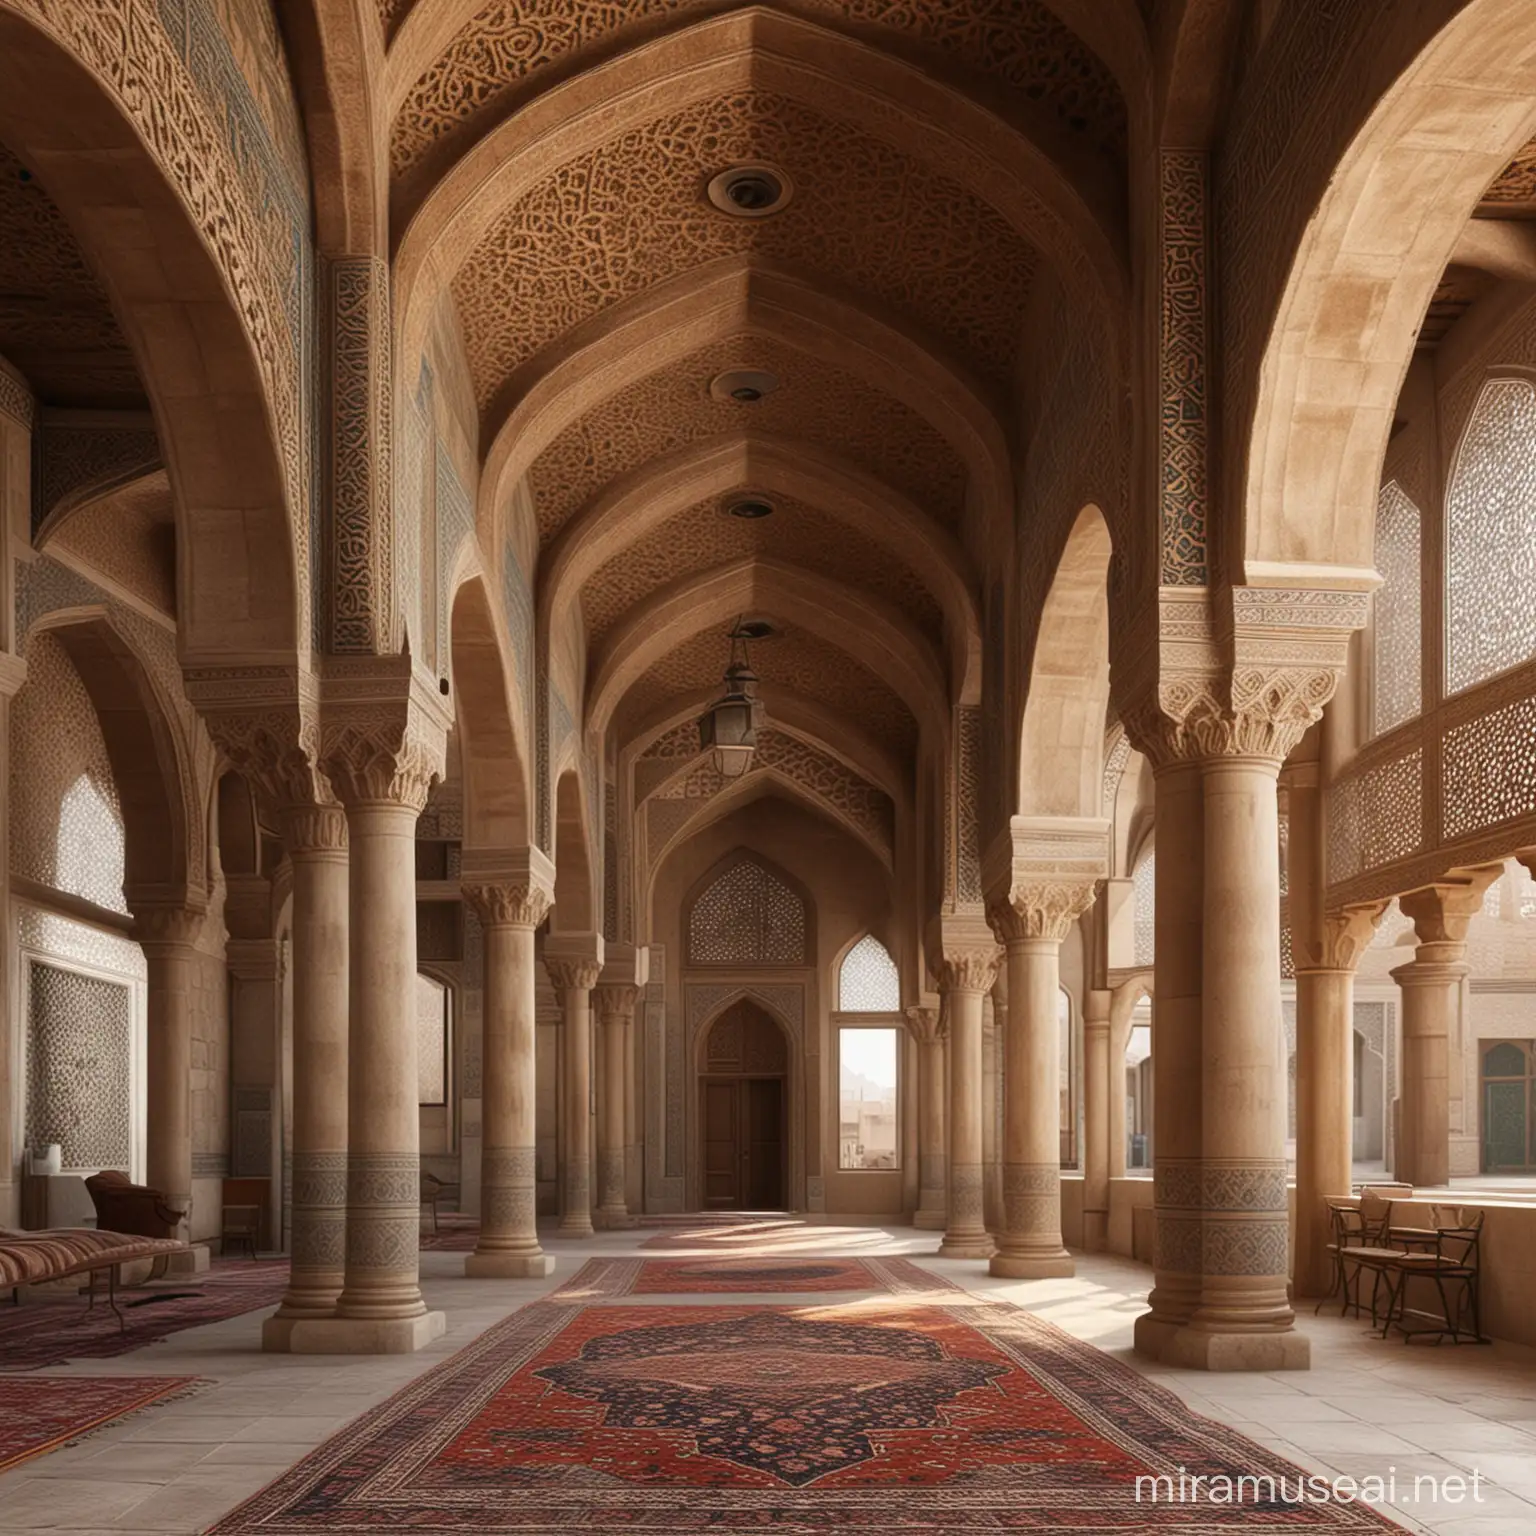 mix the modernation with old persian architecture design real renders